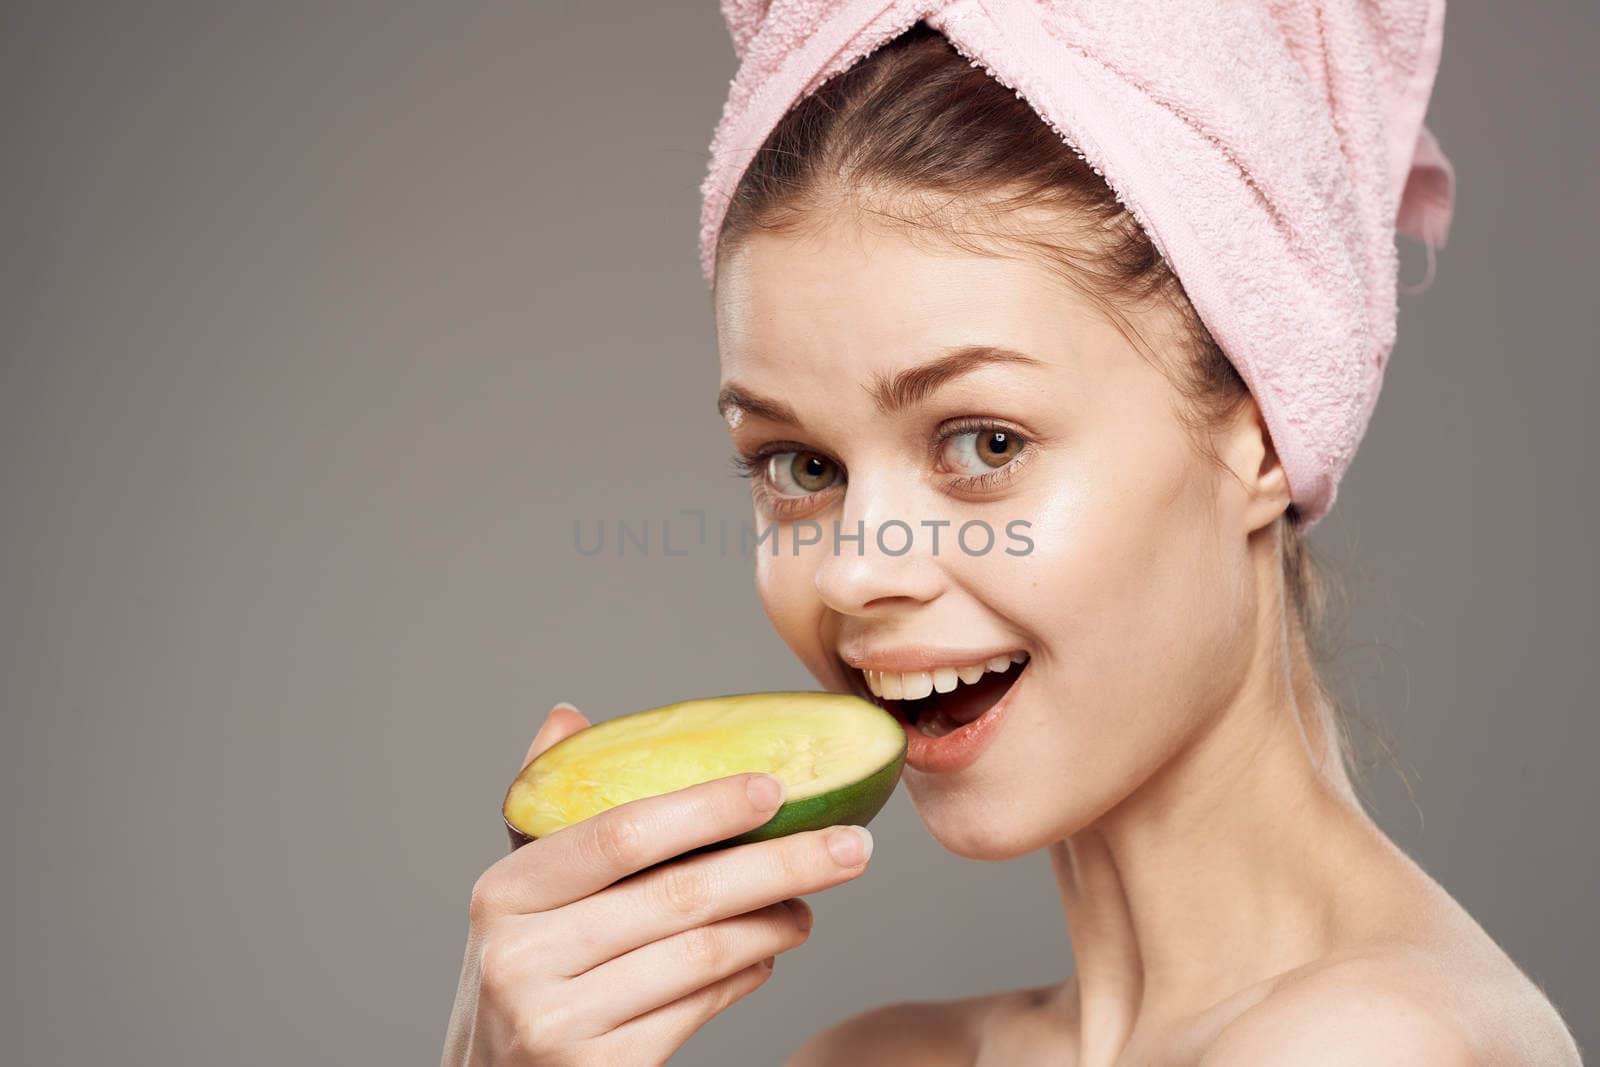 Pretty woman holding a mango in her hand a pink towel on her head close-up by SHOTPRIME